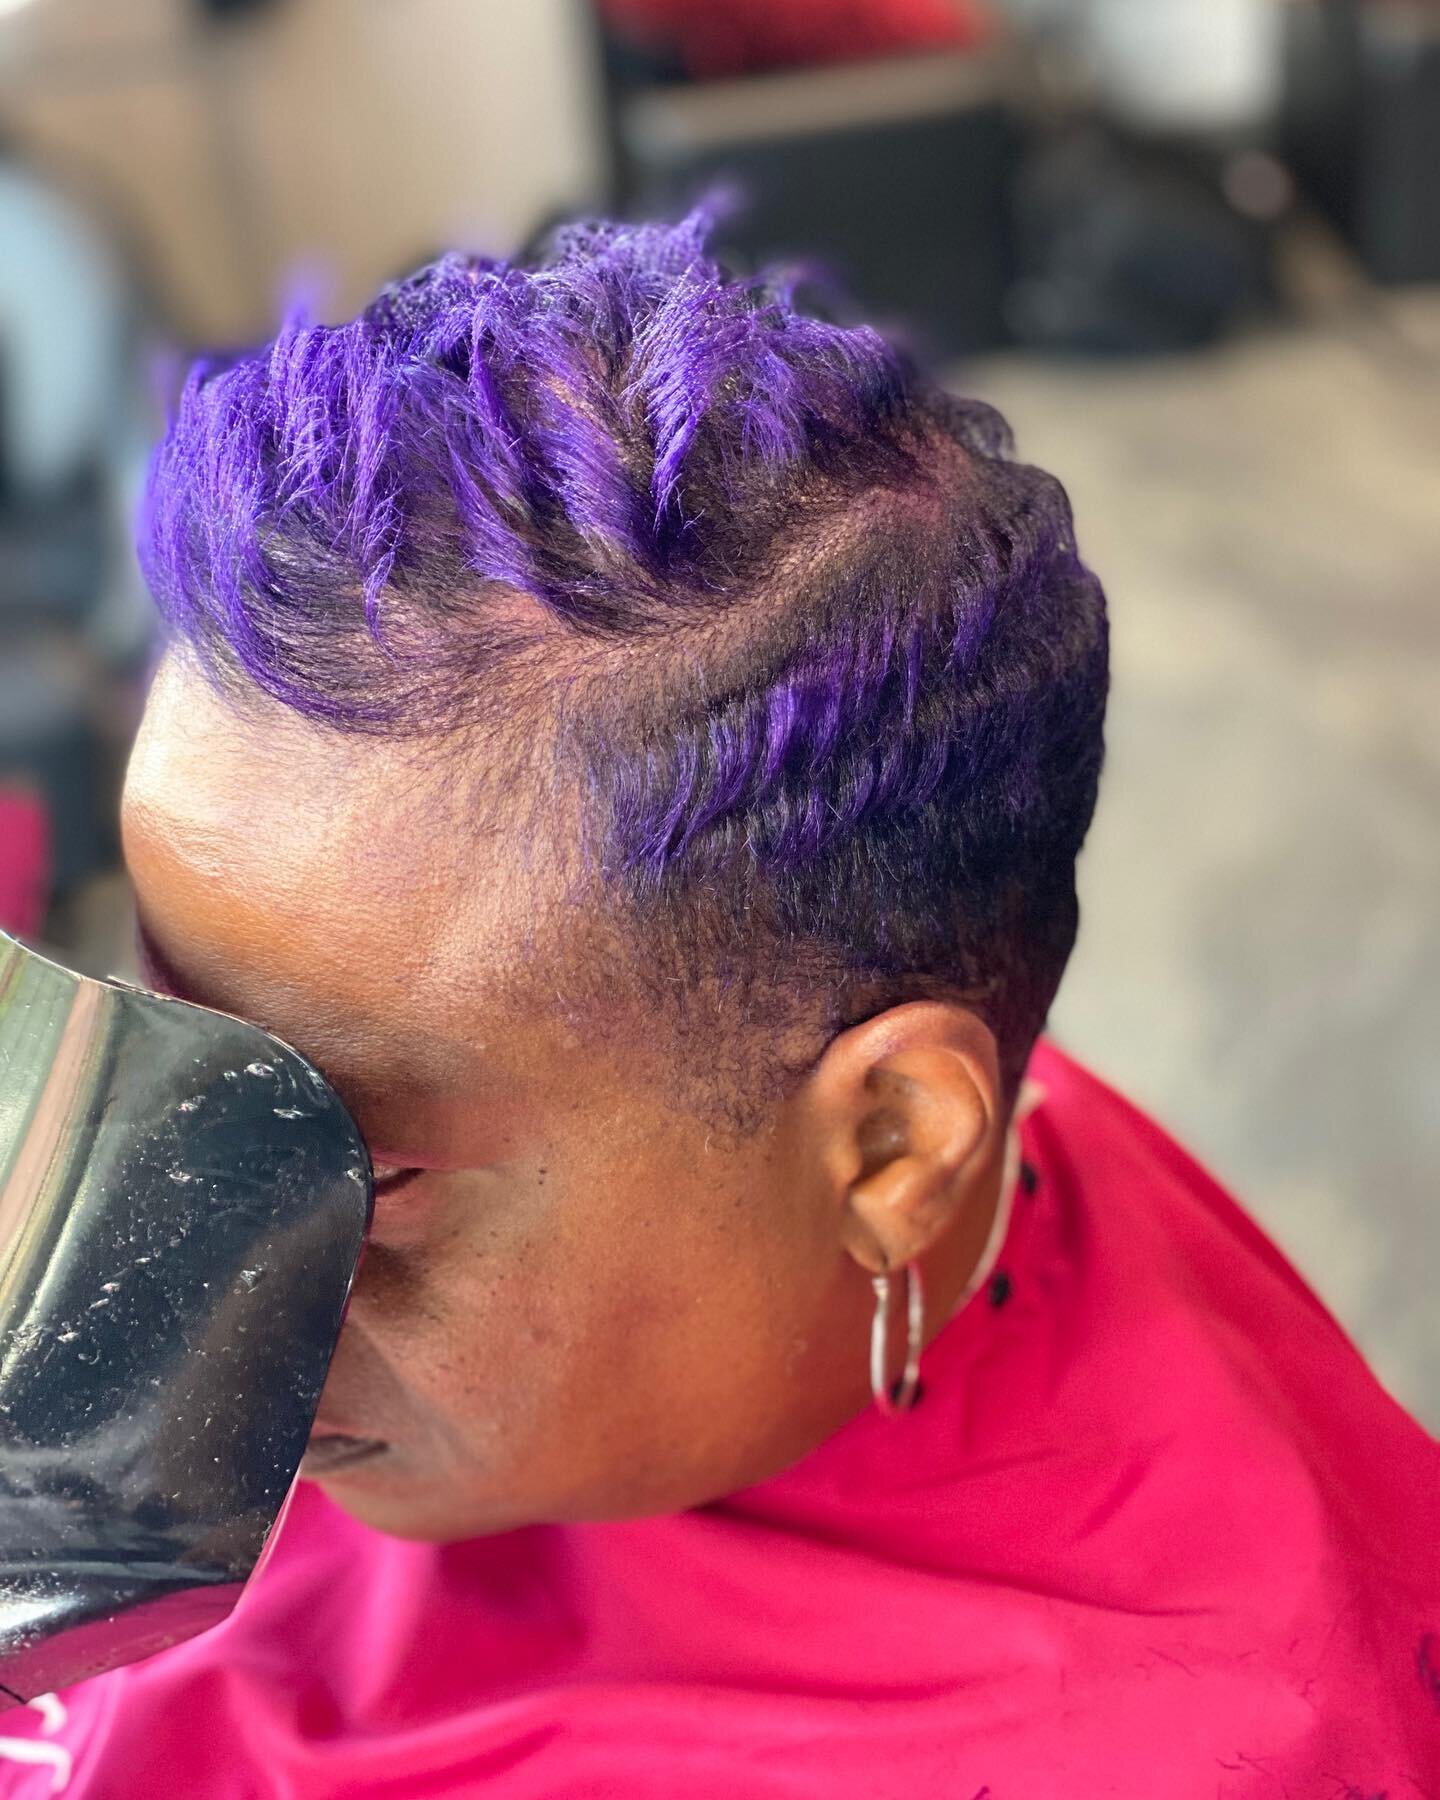 Did someone say #purple Friday?

#dmvstylist #owingsmills #pikesville #hairstylist #colorist #visagecolor #explore #explorepage #haircare #hairgoals